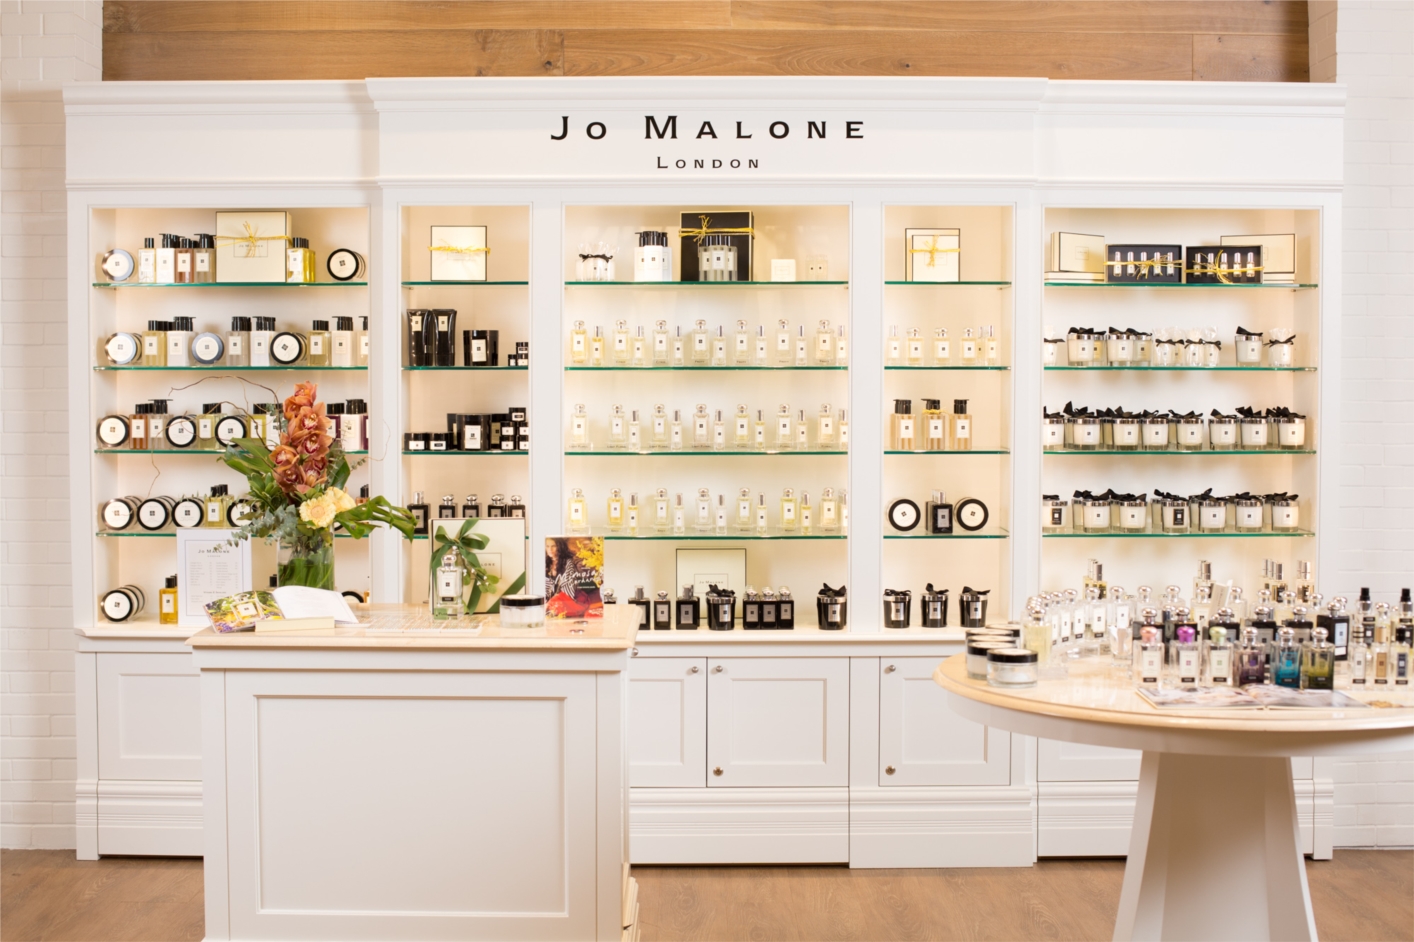 The coveted Jo Malone London in Rochester. 